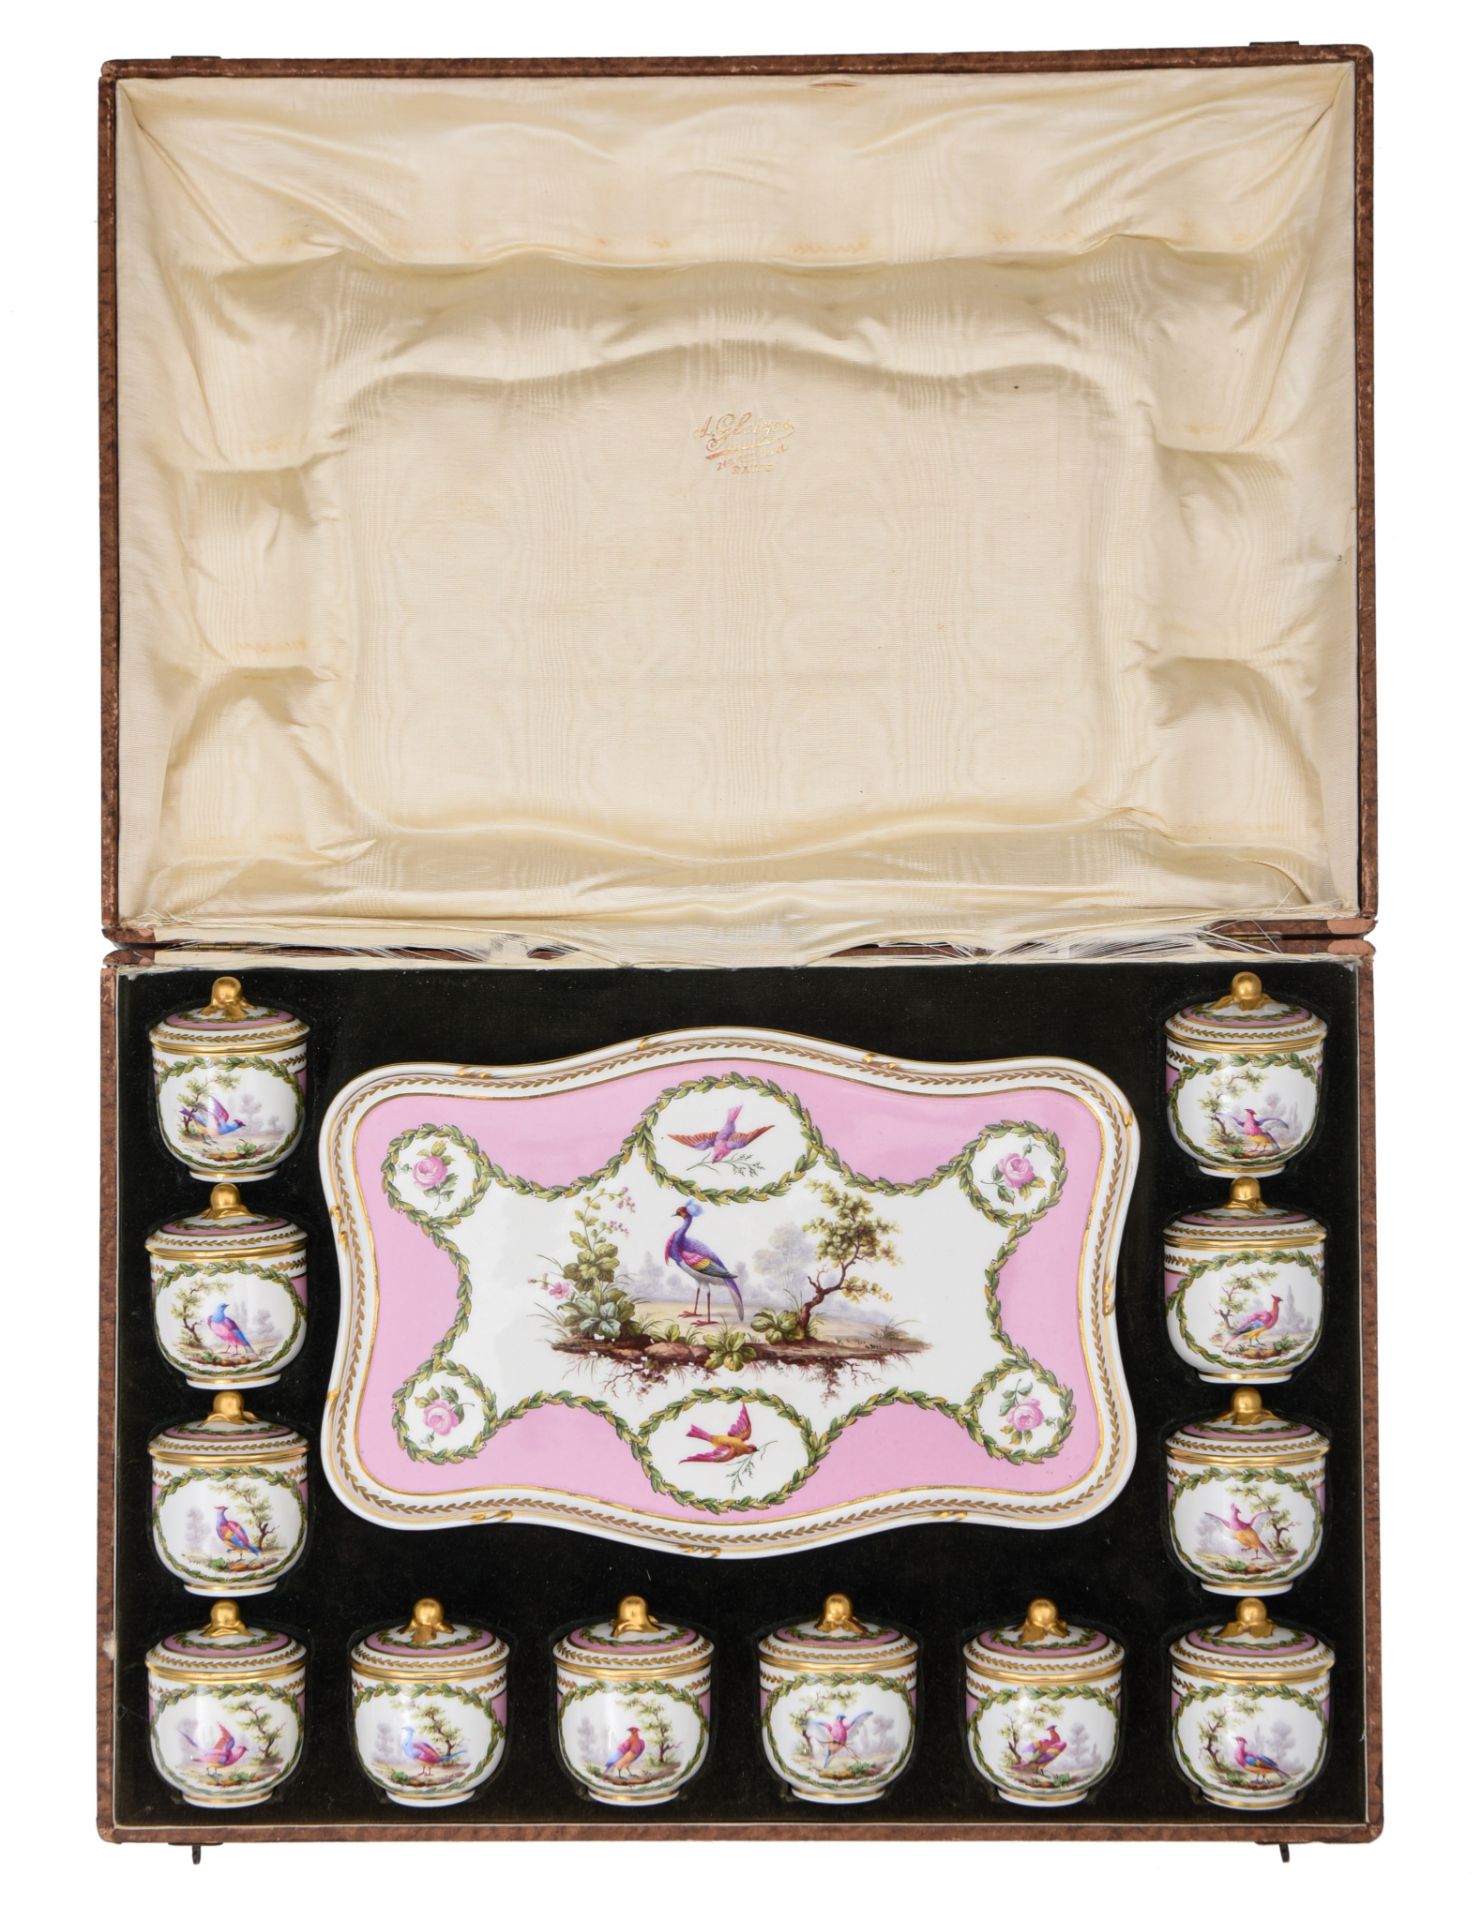 (BIDDING ONLY ON CARLOBONTE.BE) A 12 person Sevres porcelain set of dessert cups on a matching tray,